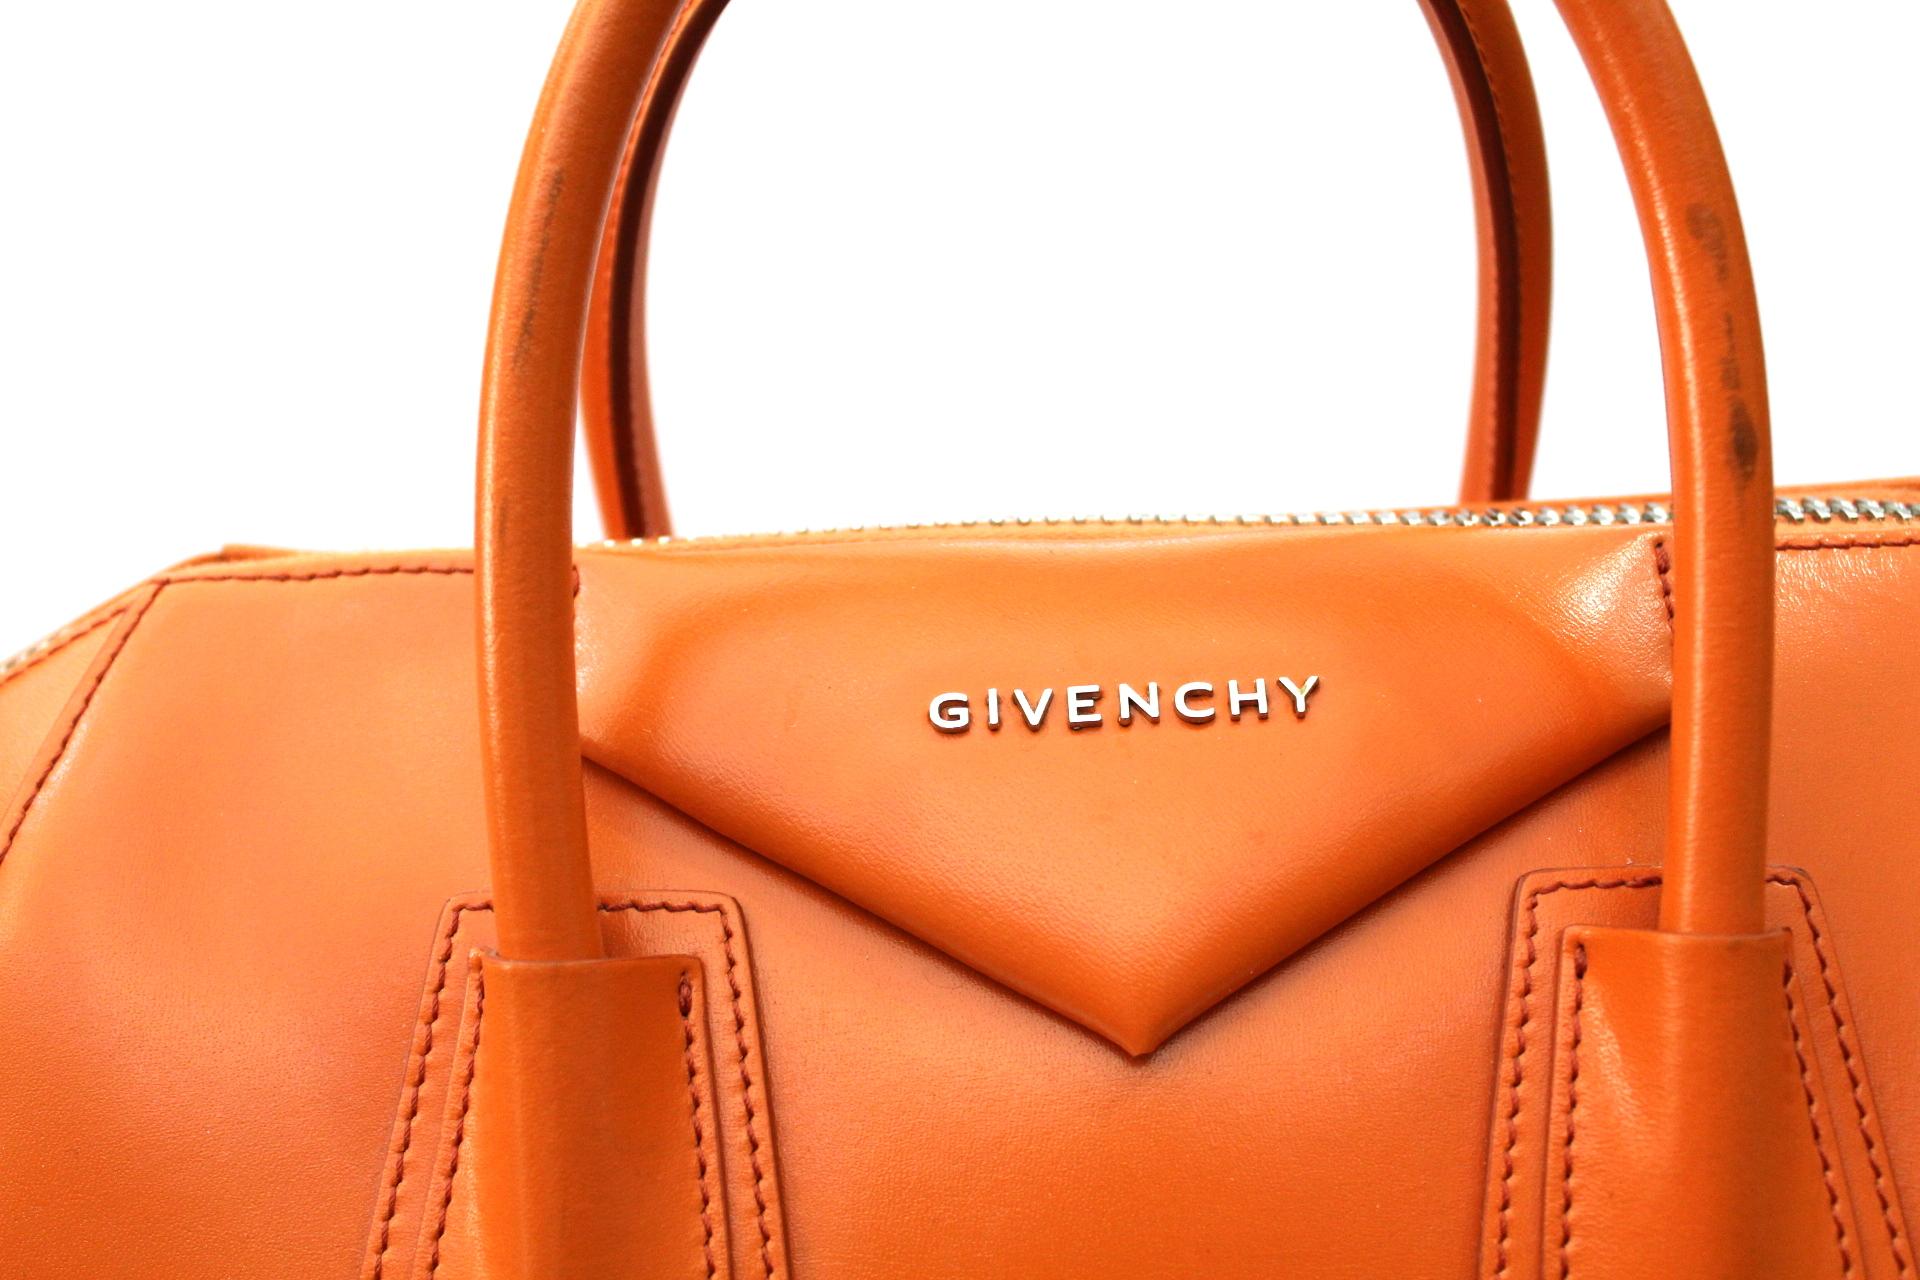 This Givenchy Medium Antigona features the distinctive envelope-shaped logo and a structured shape it is
well known to Givenchy lovers all over the world. It also has elegant silvertone details and metal details.
Two upper handles in rigid laminated